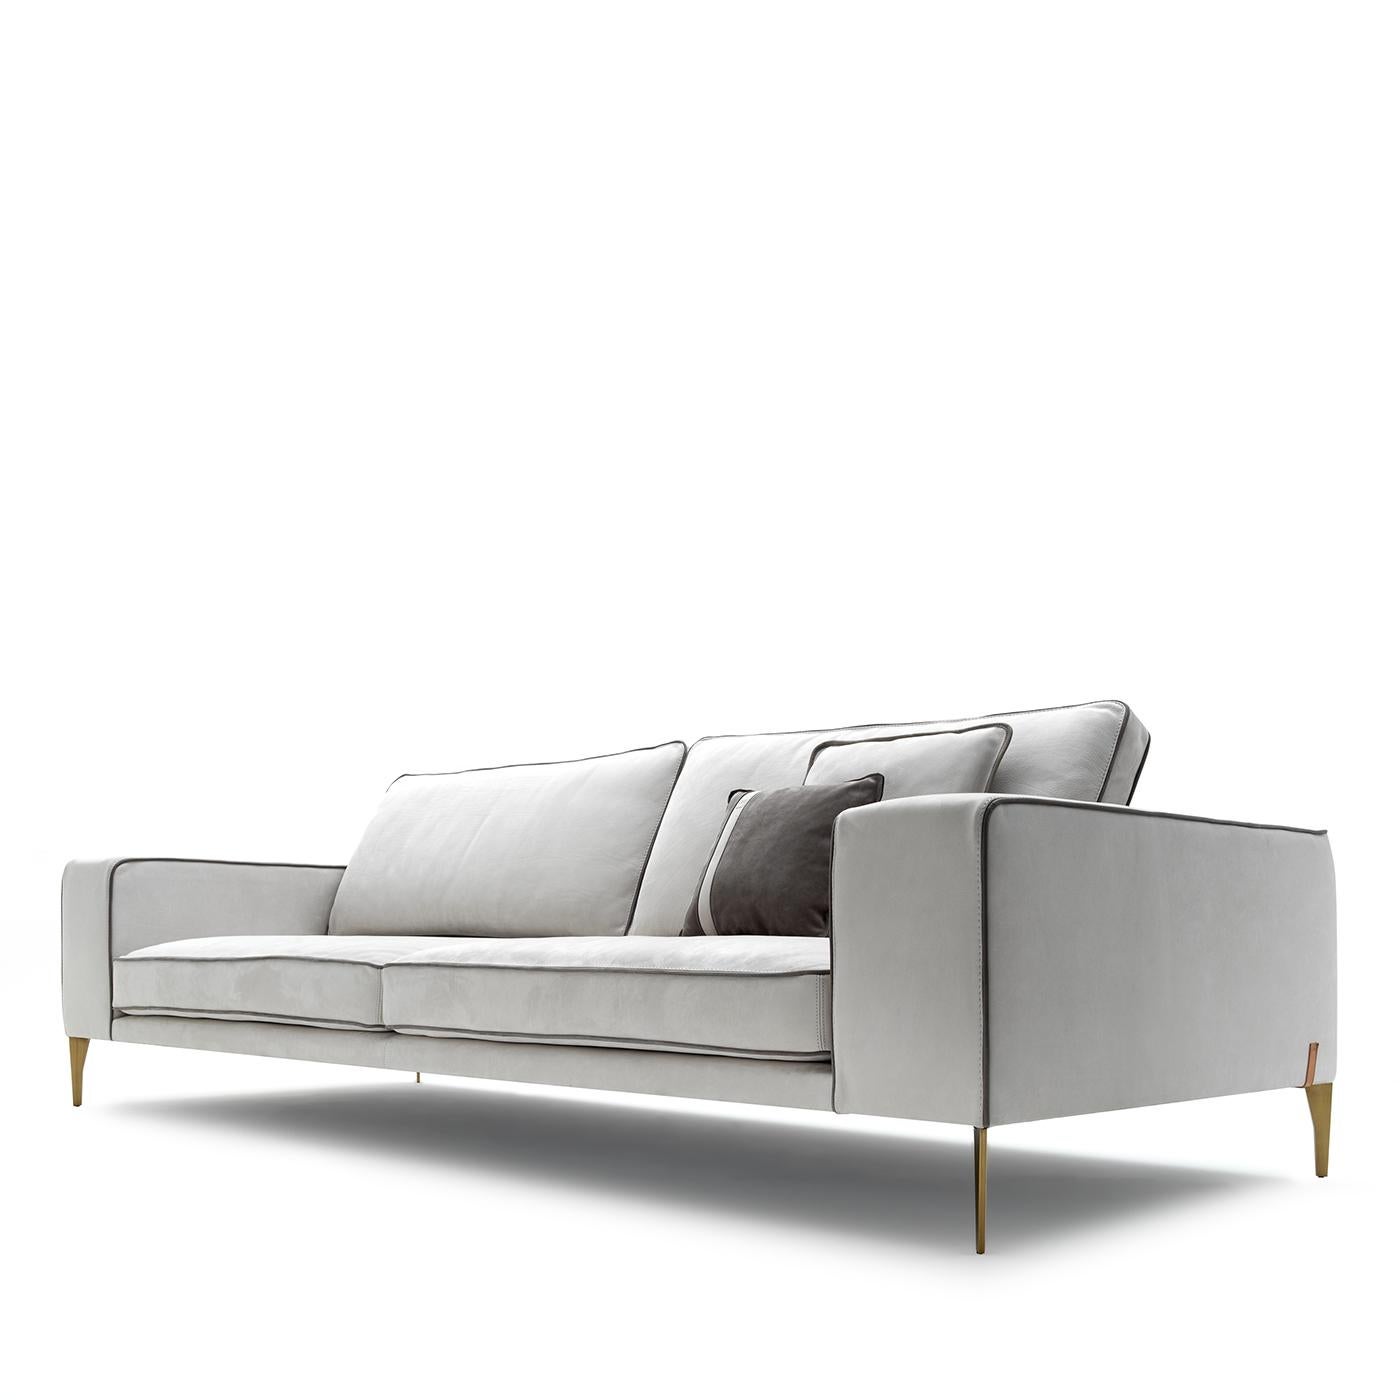 An elegant and clean design by Castello Lagravinese Studio, this sofa boasts a pure white tone that will make a refined statement in any modern decor. Resting on sturdy metal feet marked by a satin brass finish, it is upholstered of soft and velvety